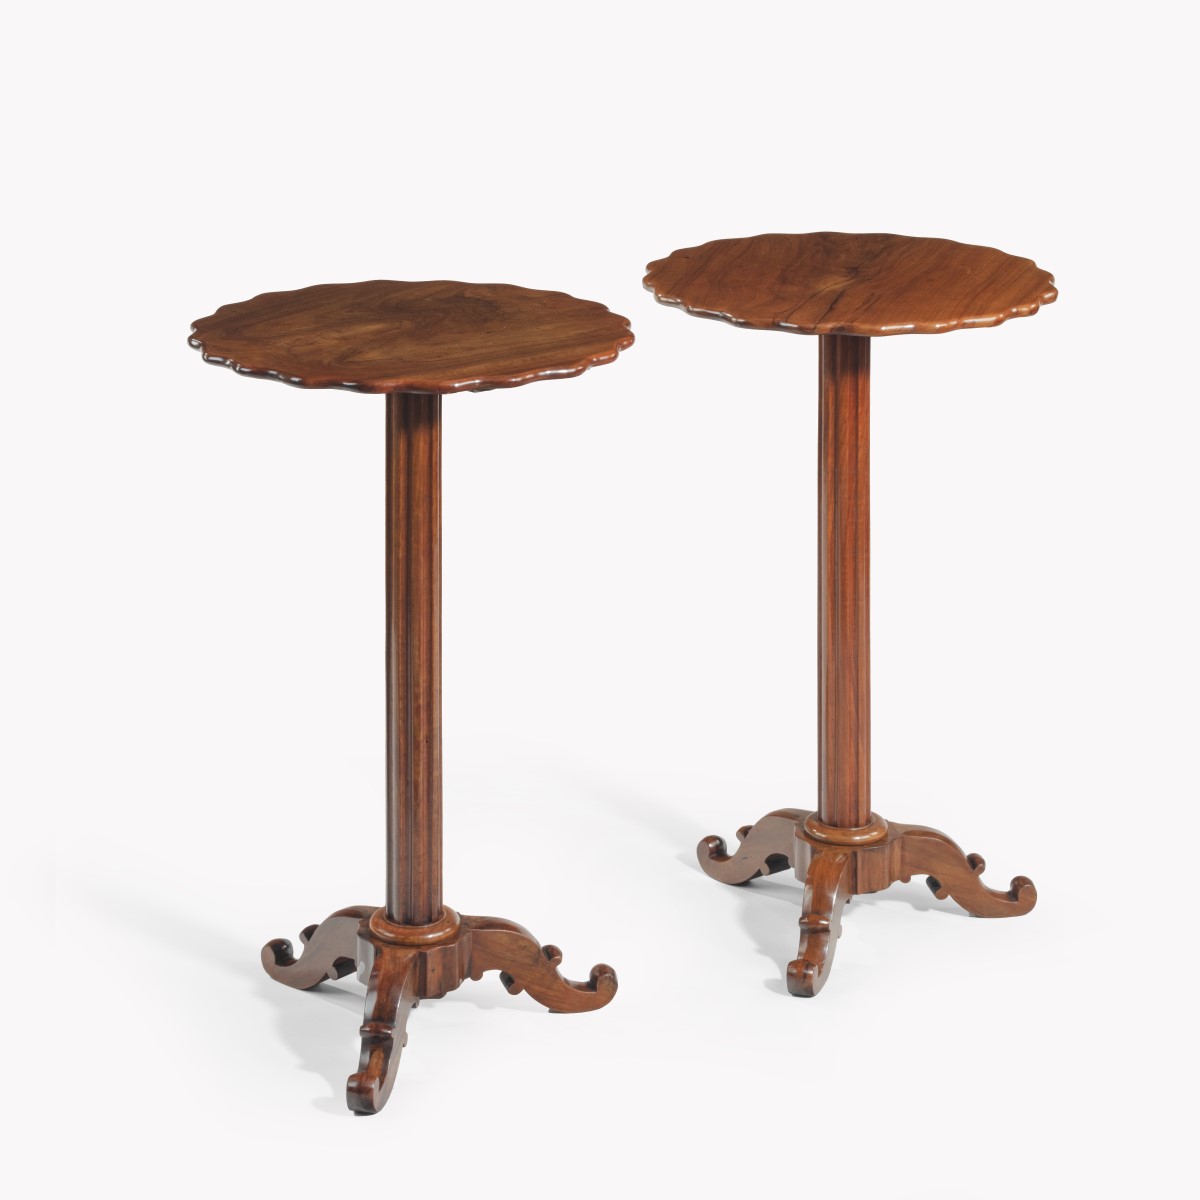 A pair of Italian solid olive wood side tables